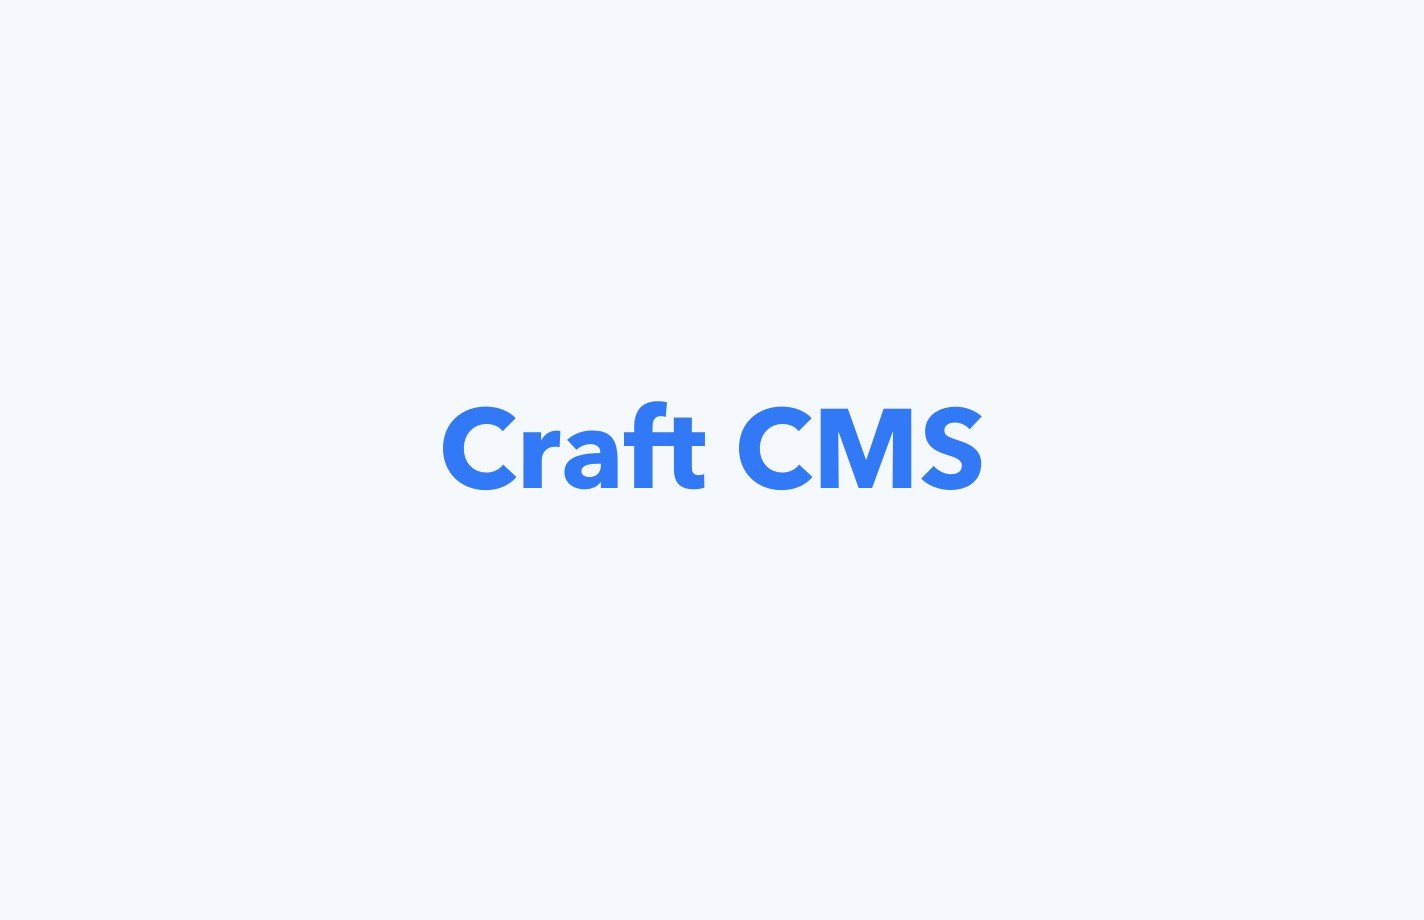 craft cms definition what is craft cms cover image